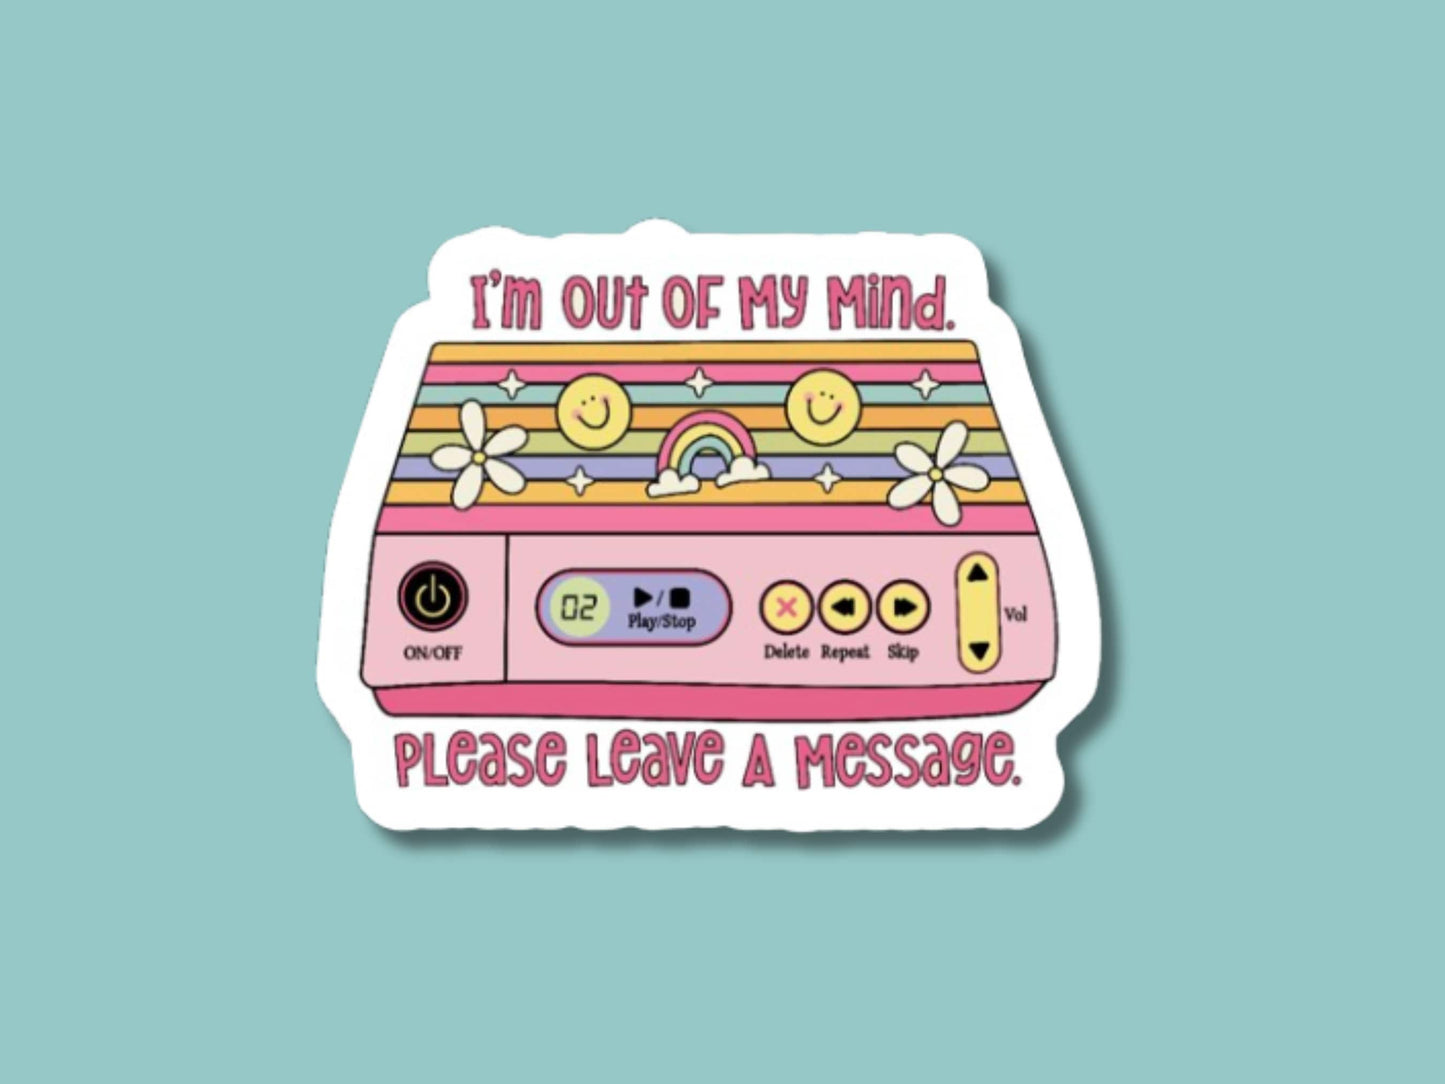 out of my mind sticker, funny stickers for friends, laptop stickers, retro stickers, cassette tape sticker, mental health stickers